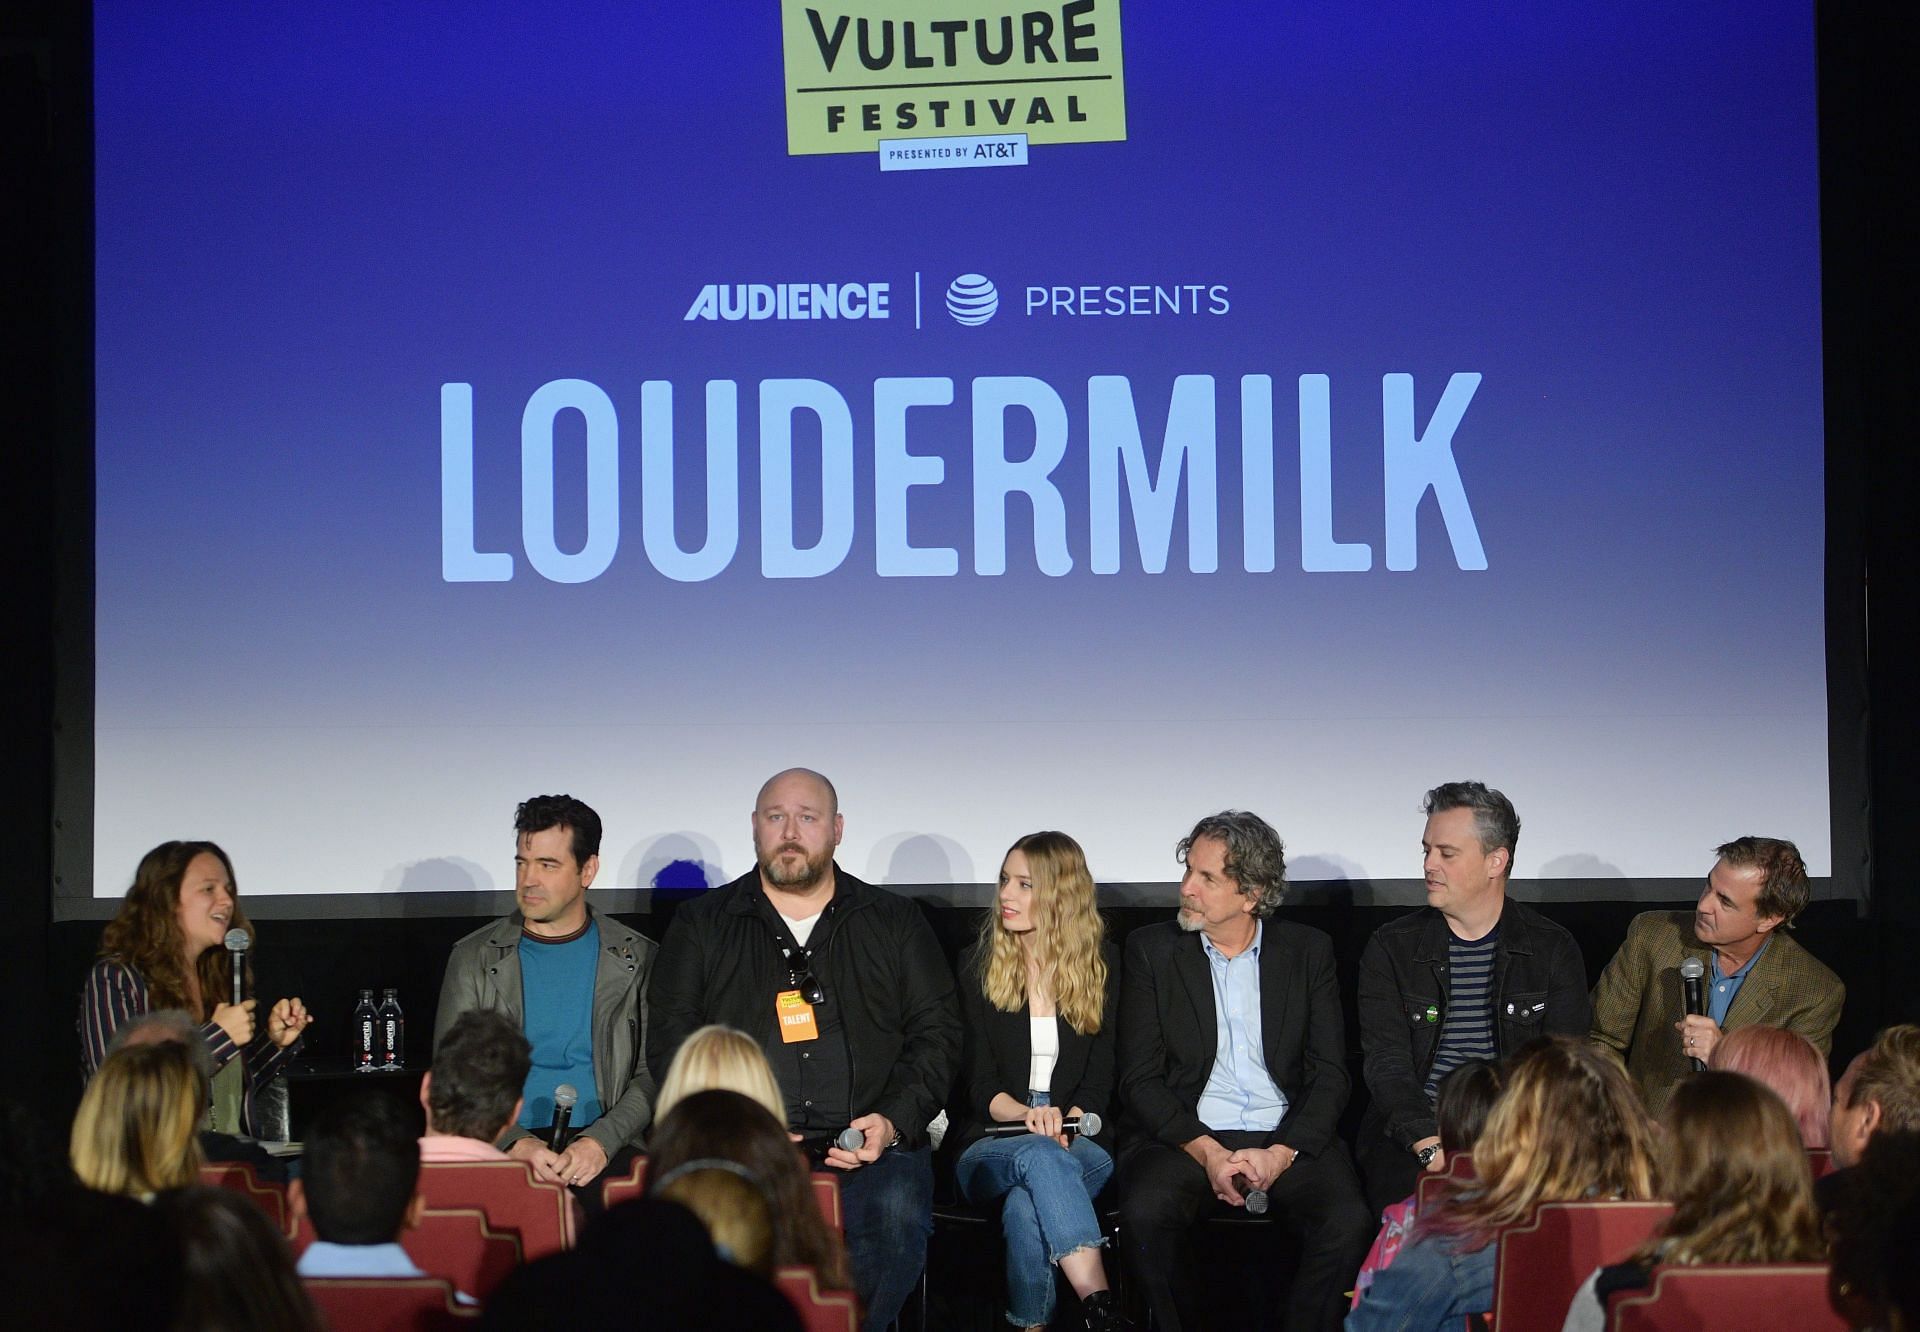 The Cast of Loudermilk at Vulture Festival (Image via Getty)